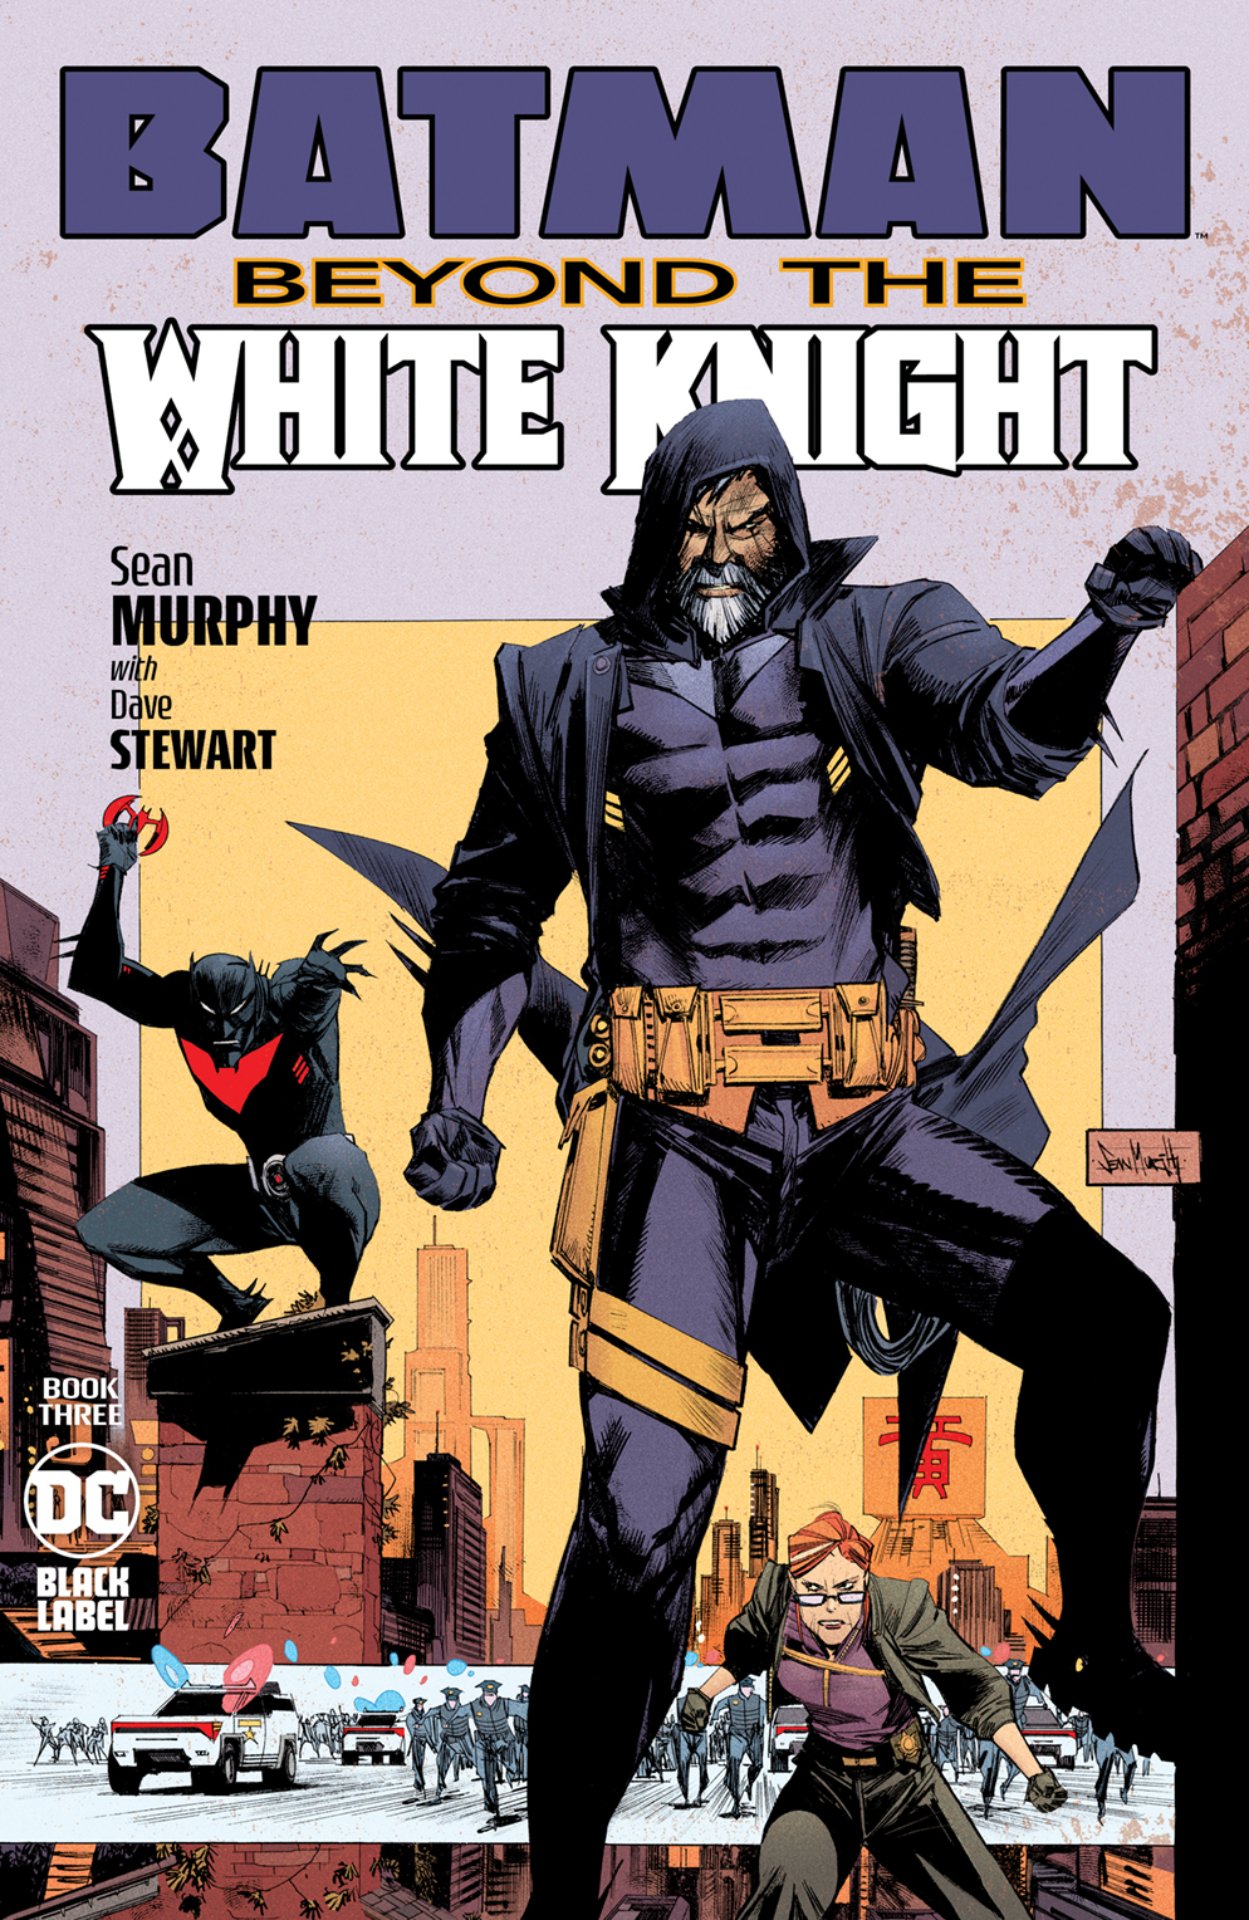 Beyond the White Knight #3 cover